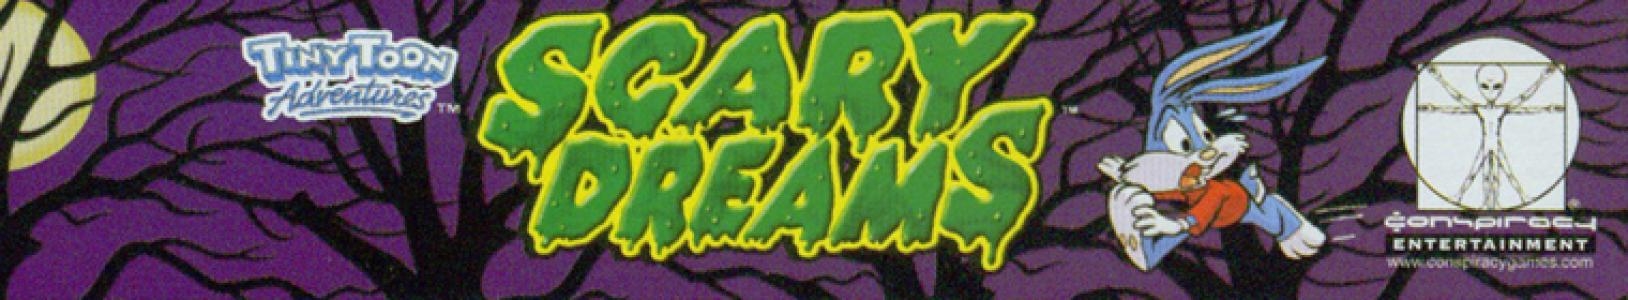 Tiny Toon Adventures: Scary Dreams banner